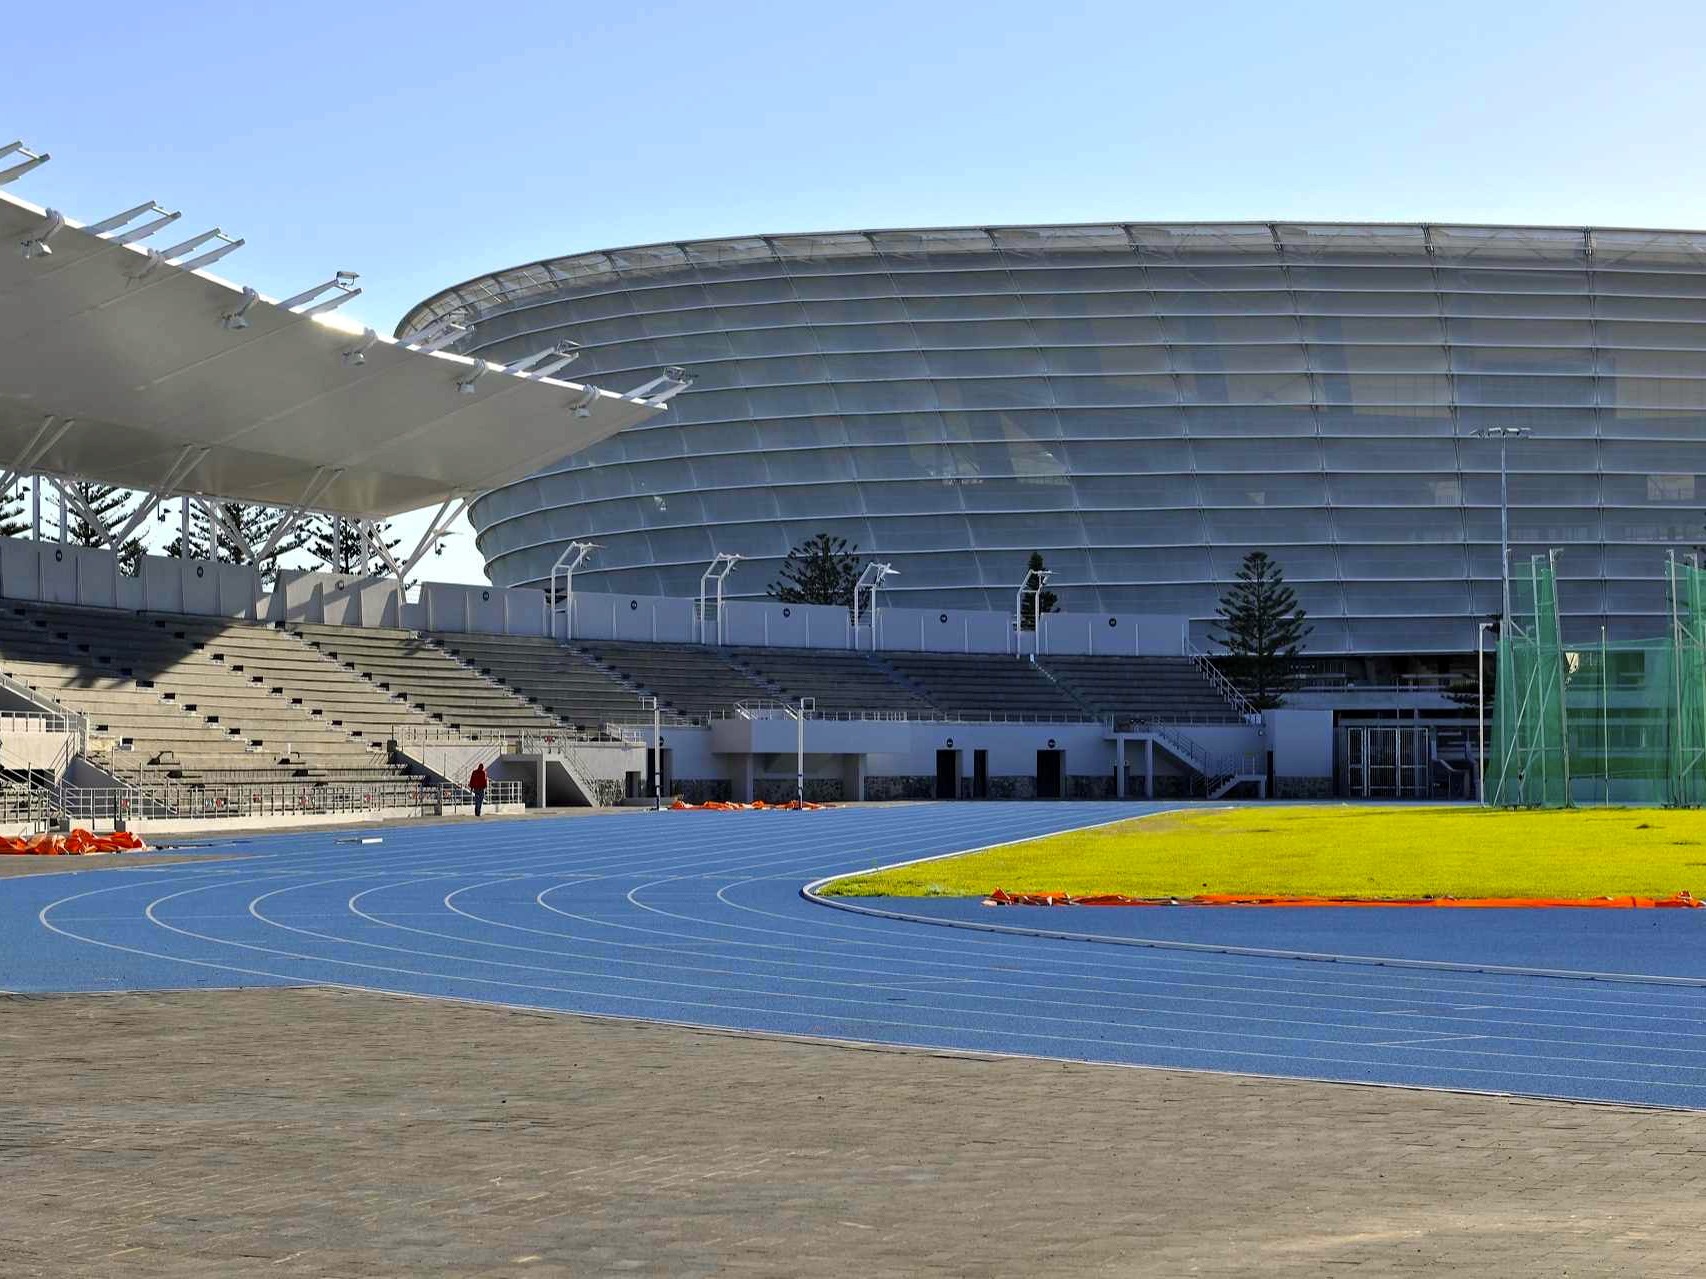 The track at the Green Point Athletics Stadium in Cape Town / Photo credit: Future Cape Town